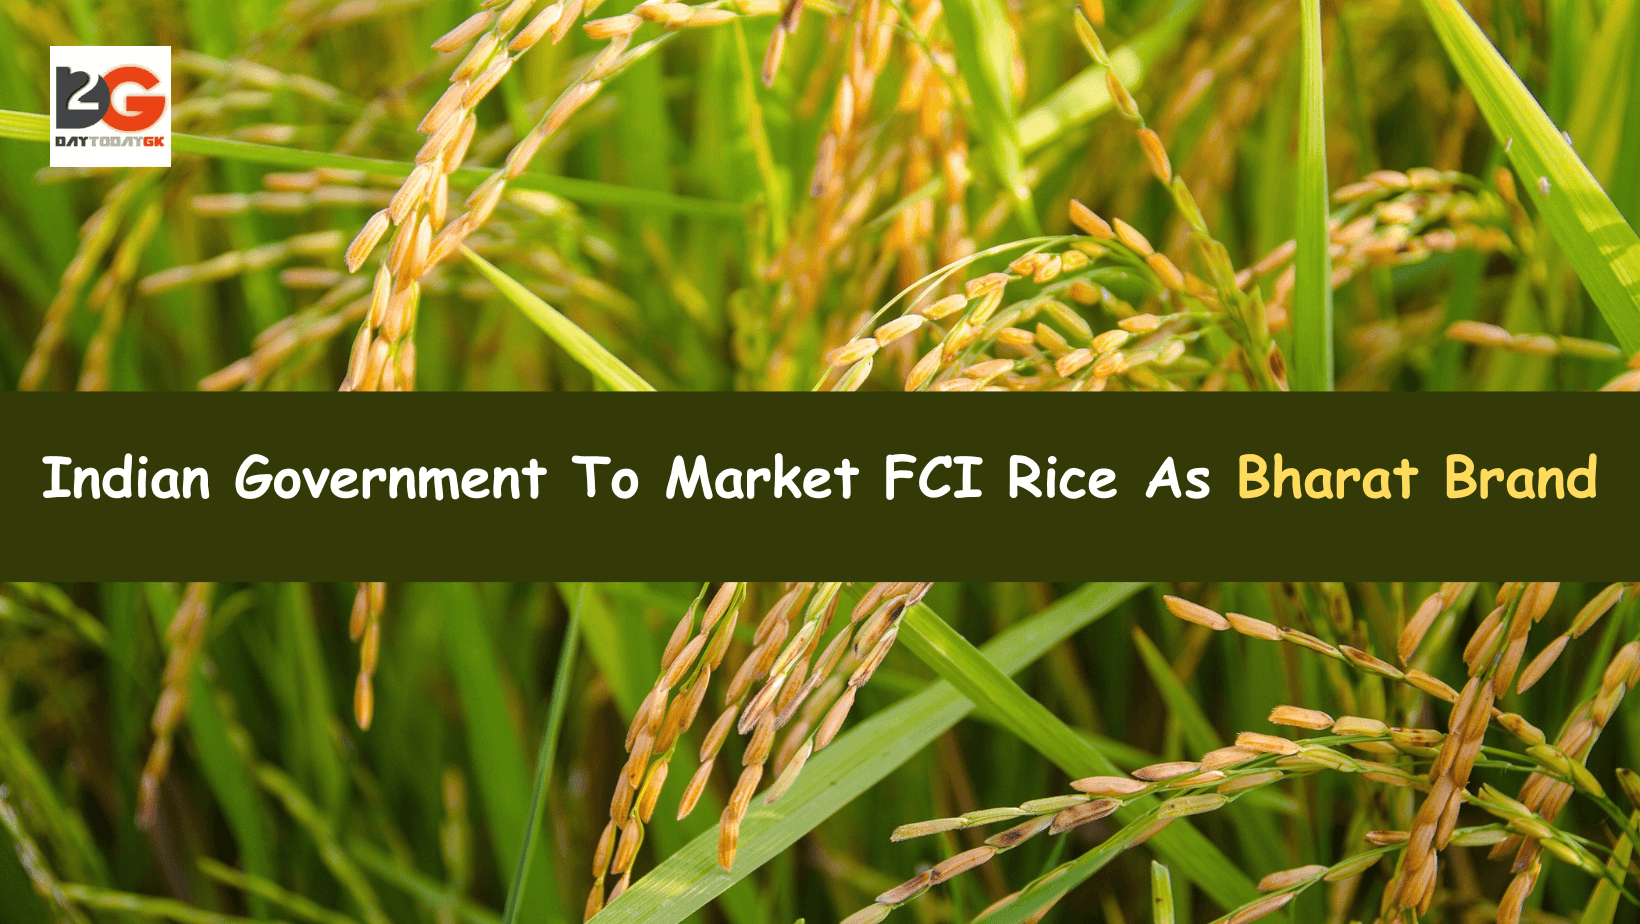 Indian Government To Market FCI Rice As Bharat Brand